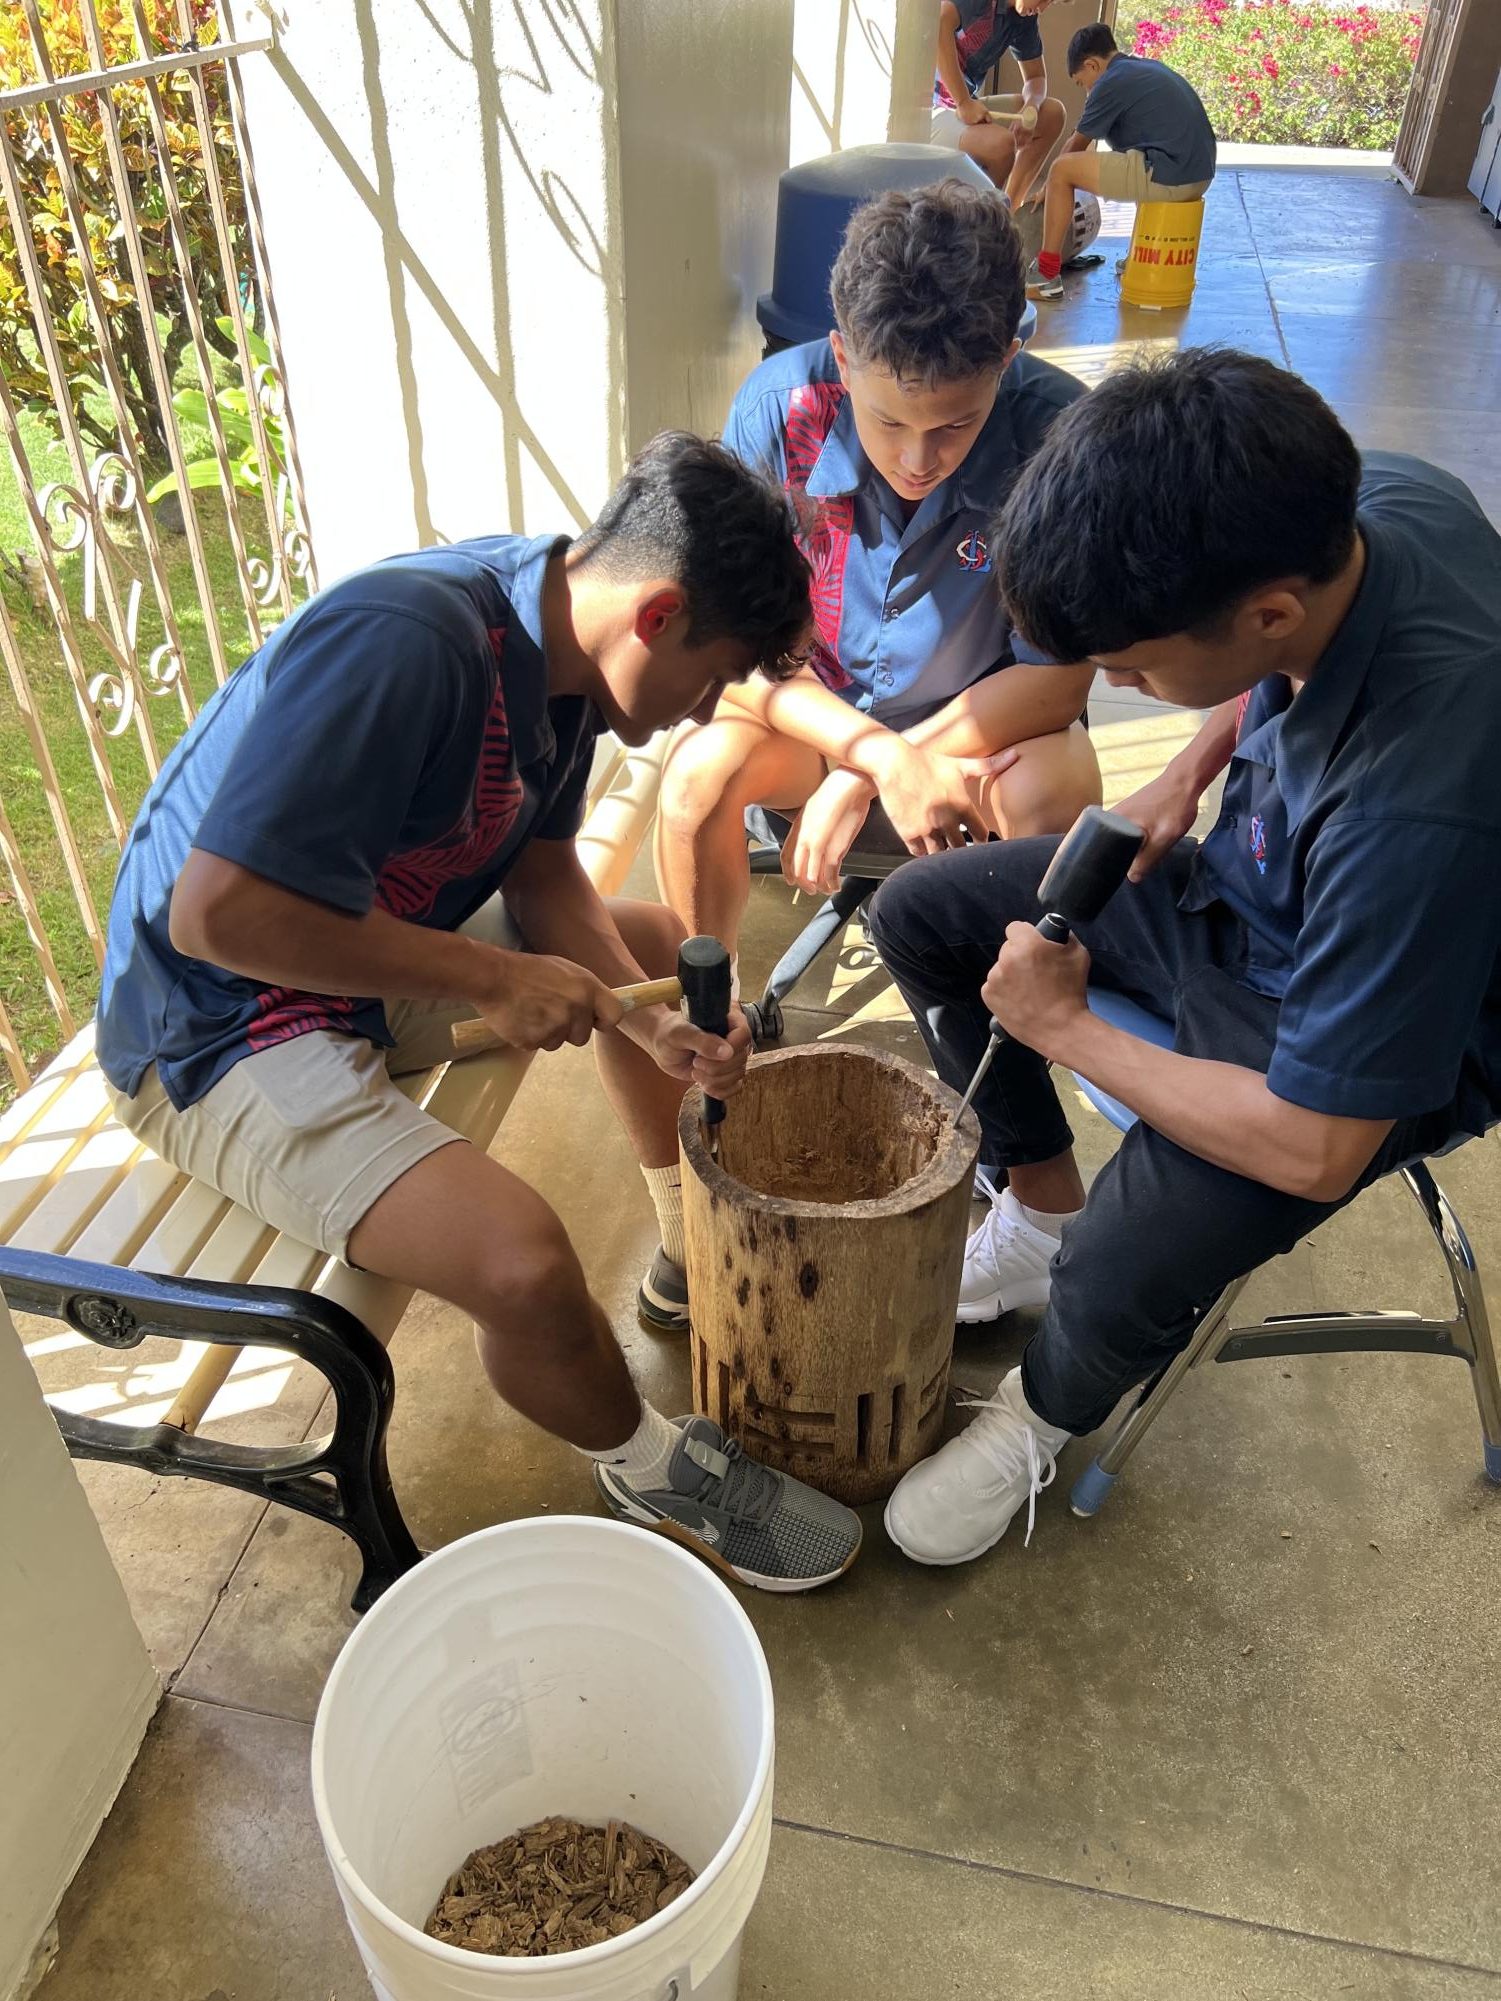 Students create a pahu drum as part of the program.